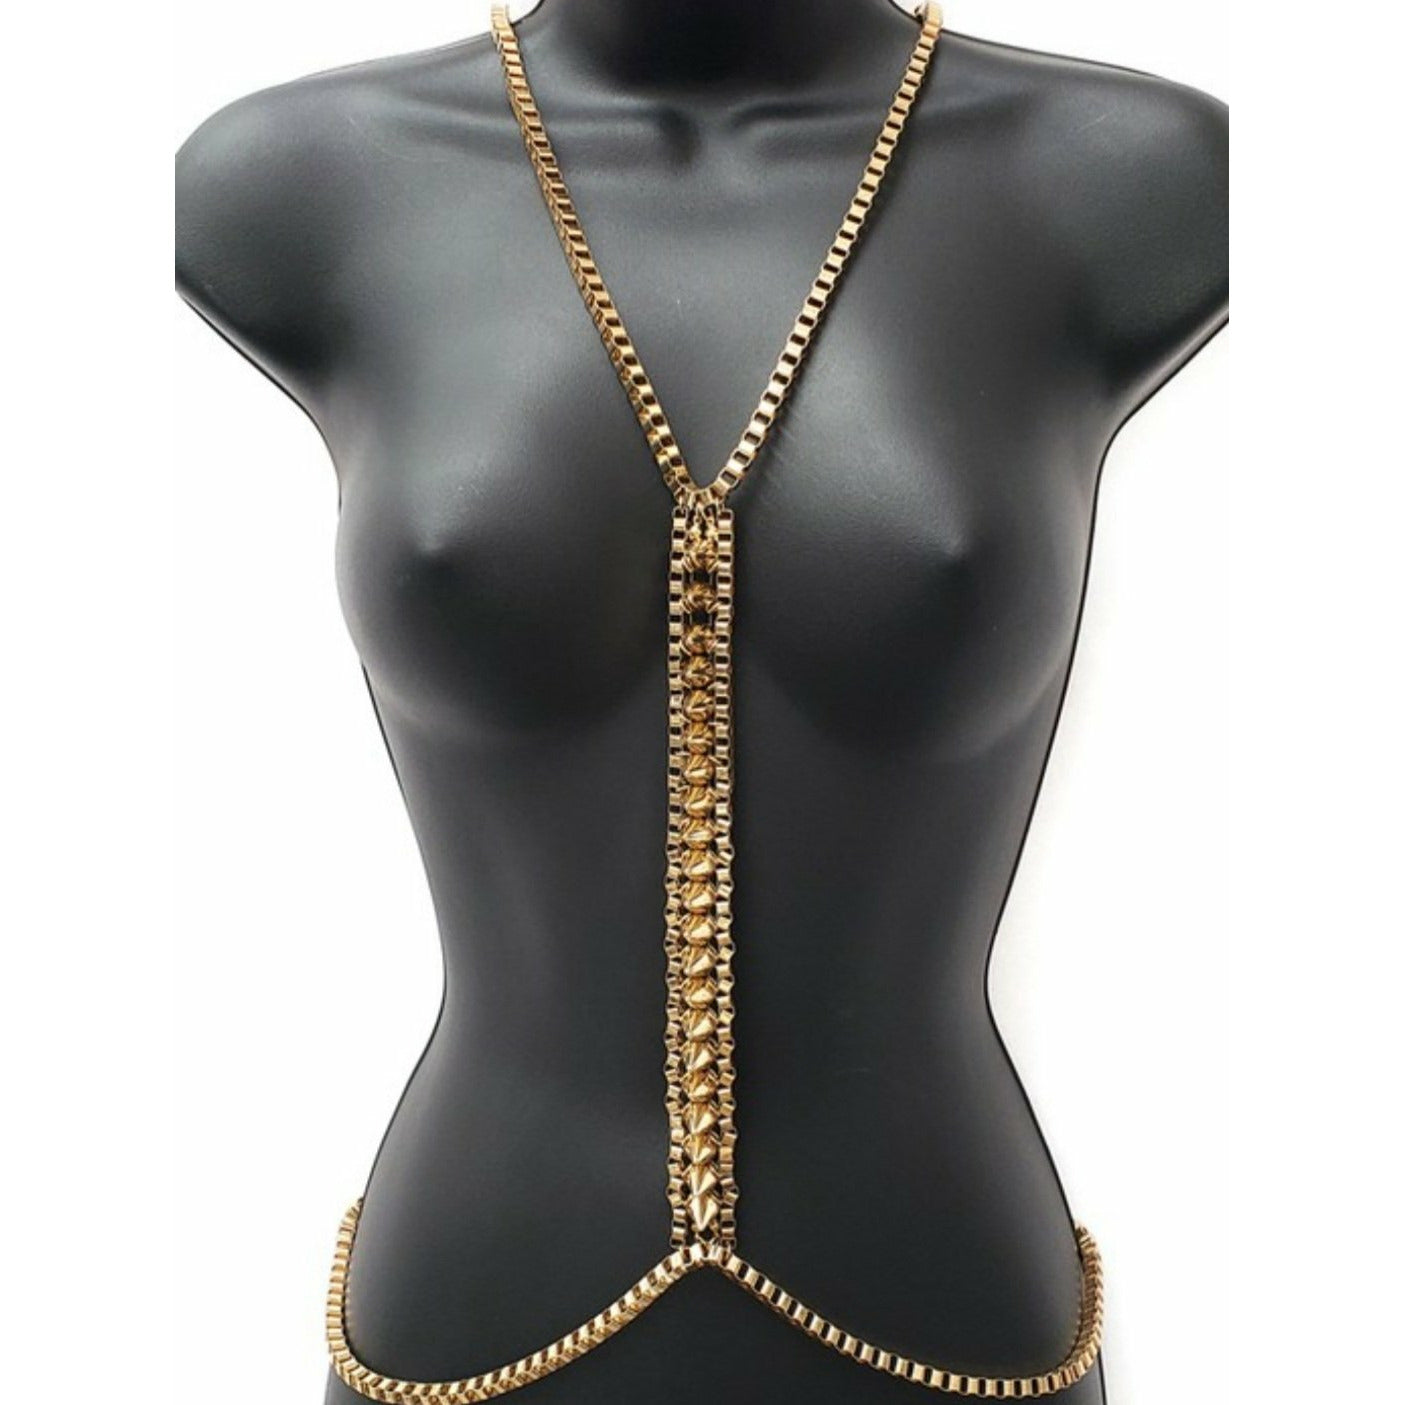 Daggered Out Body Chain